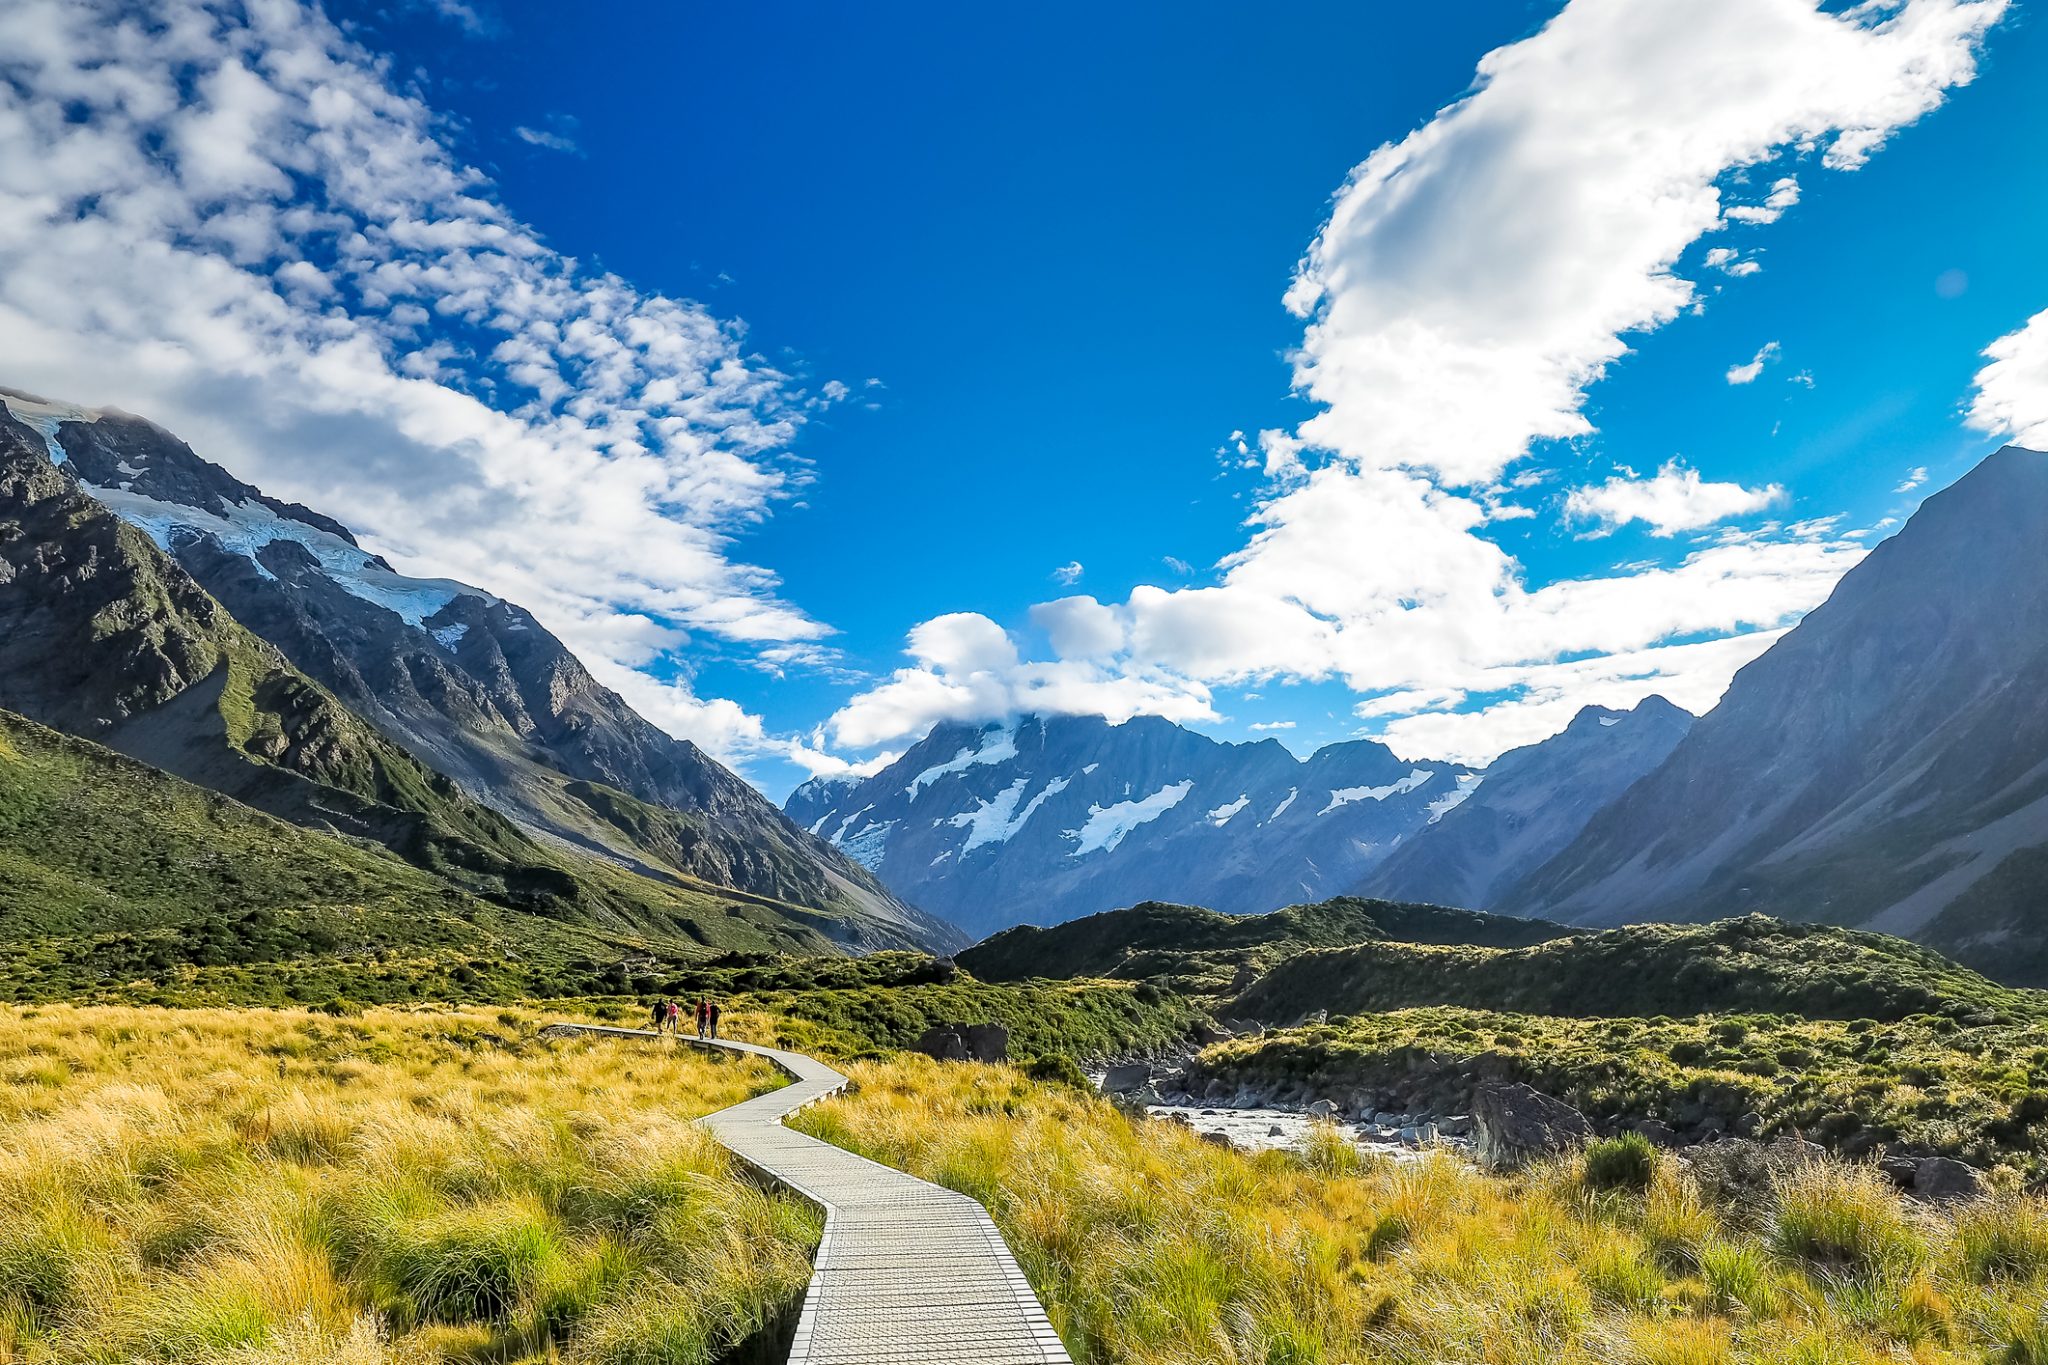 The famous landscape of Hooker Valley Track at Mt Cook National Park in New Zealand.